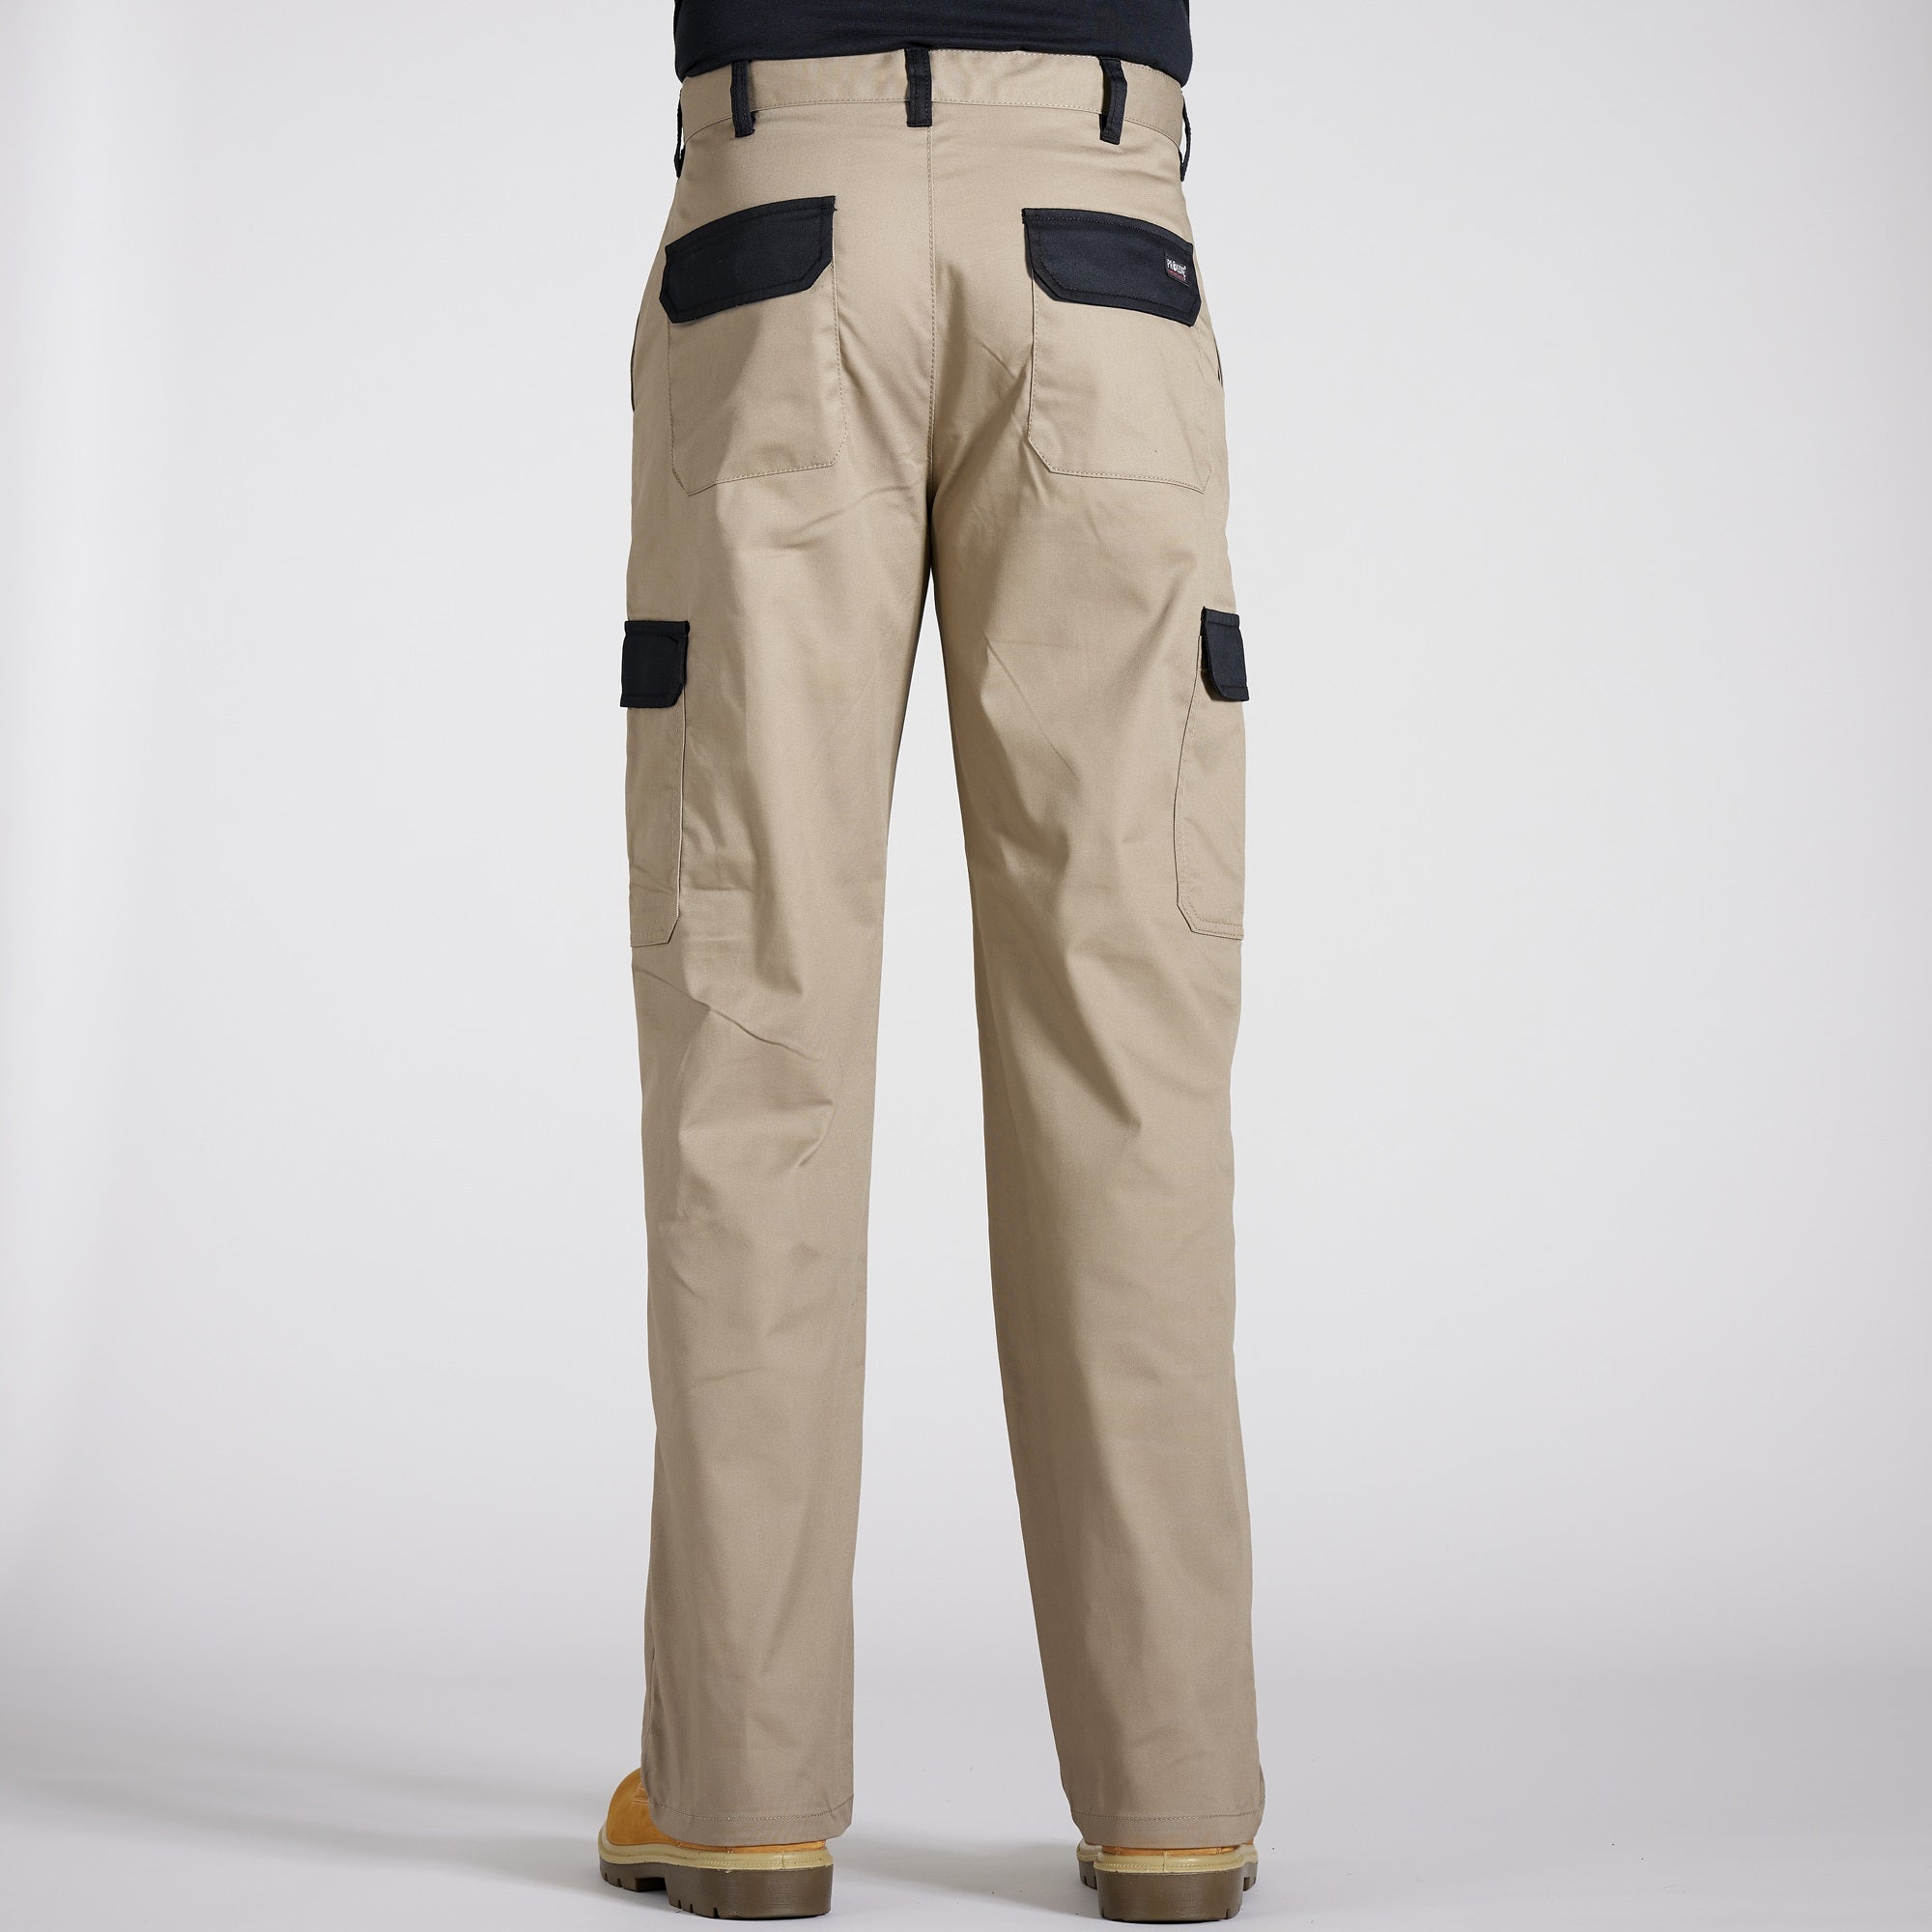 Buy Mens Combat Cargo Work Trousers Size 30 To 48 with Knee Pad Pockets  Multi Rear and Side Pockets Reinforced Belt Loop and Stitches Online at  desertcartINDIA